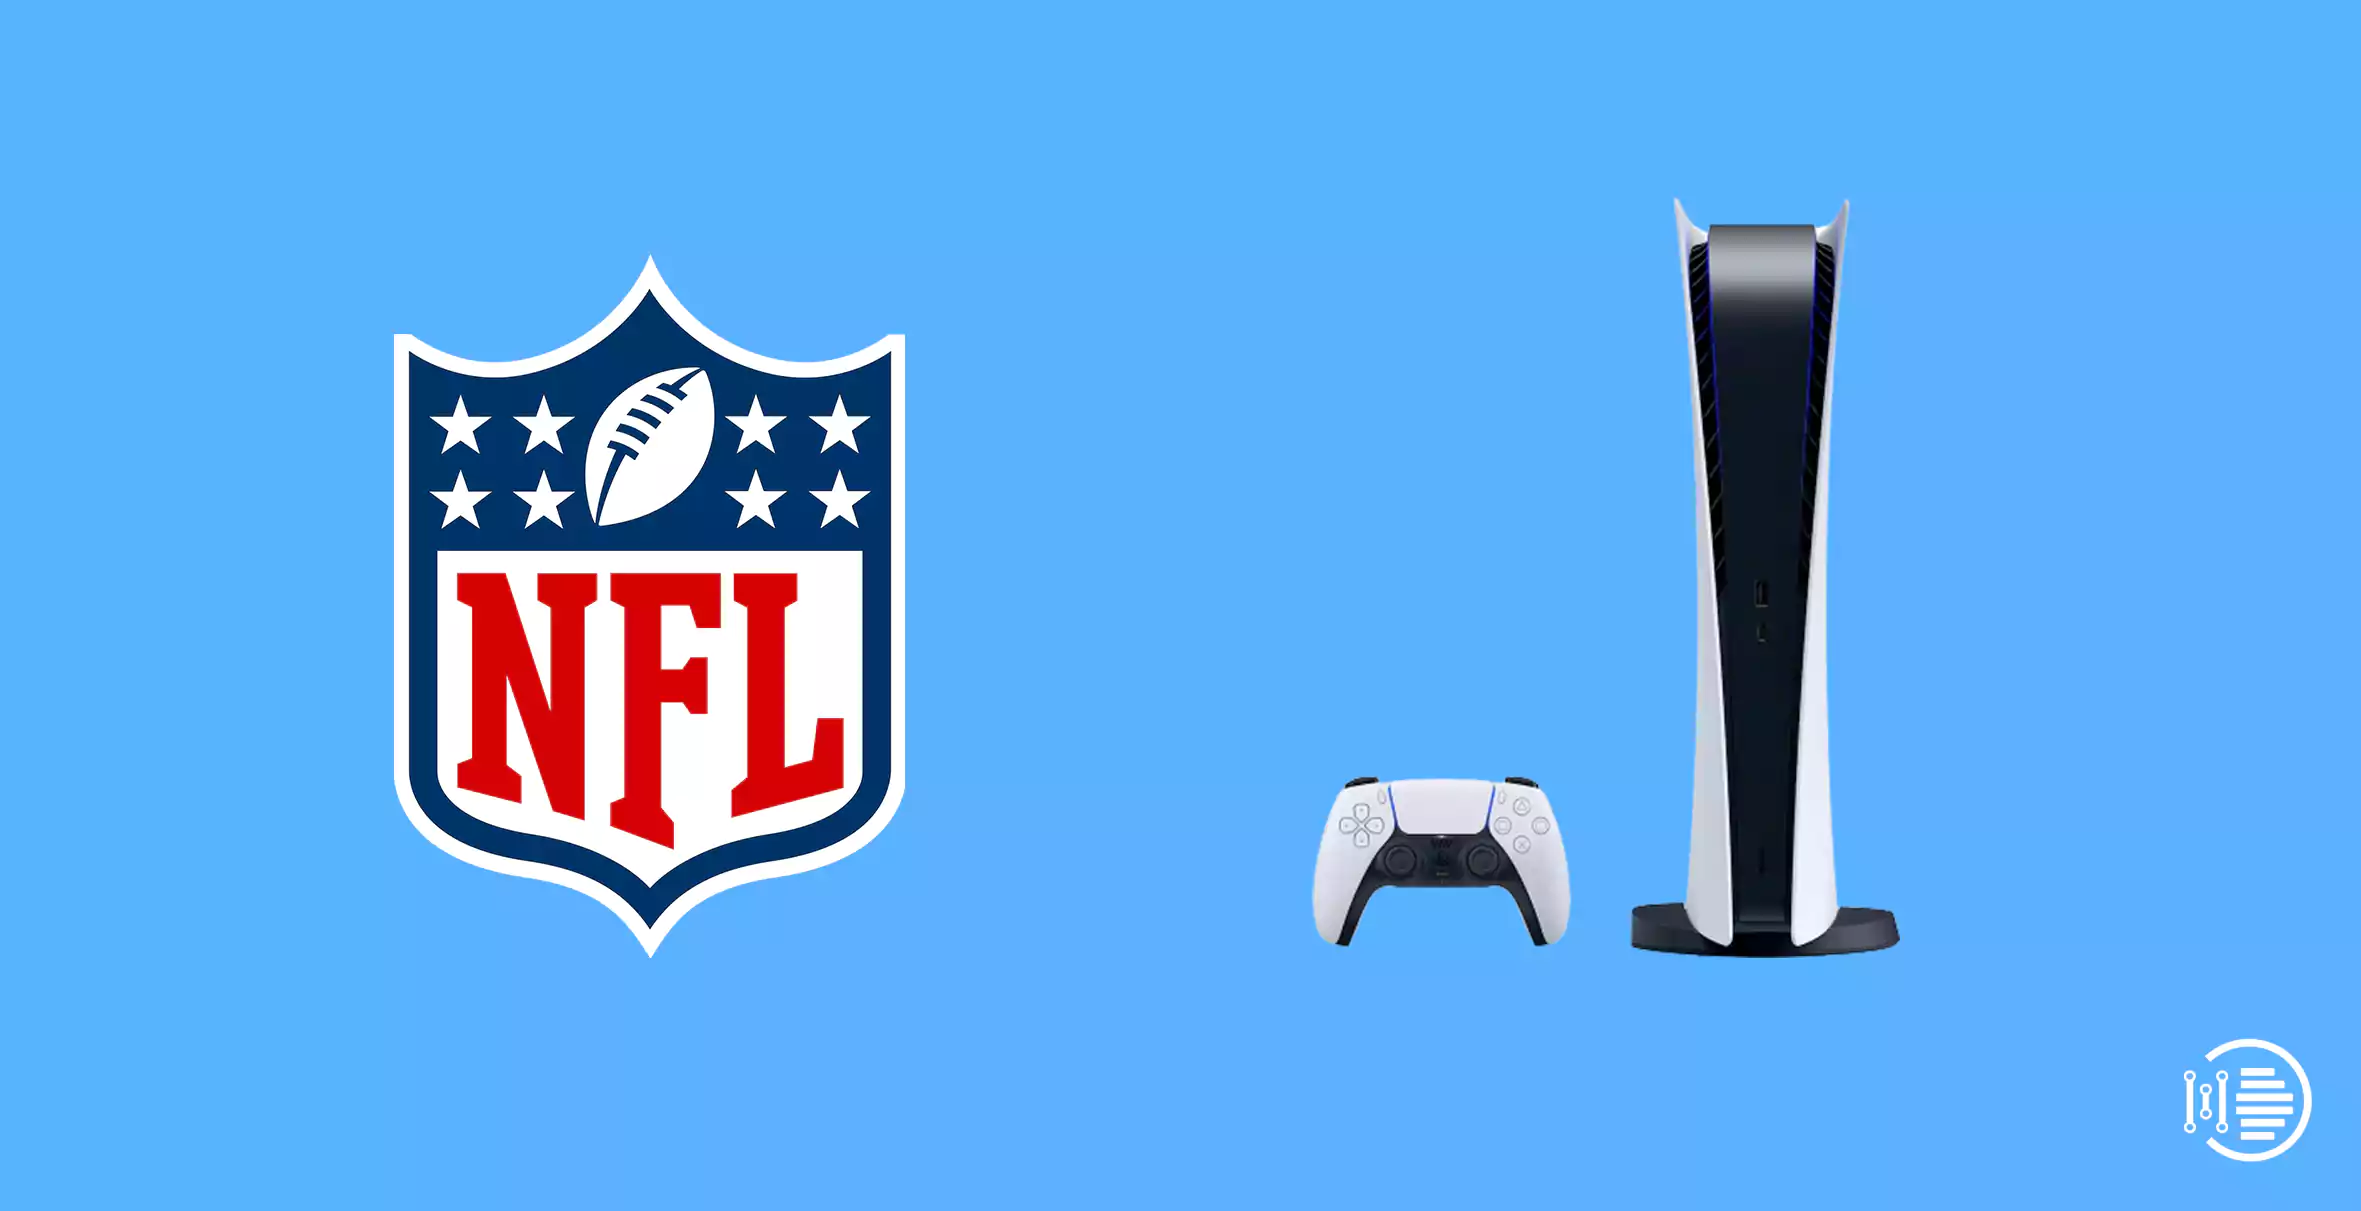 How to Install and Watch NFL on PS5 in 2022